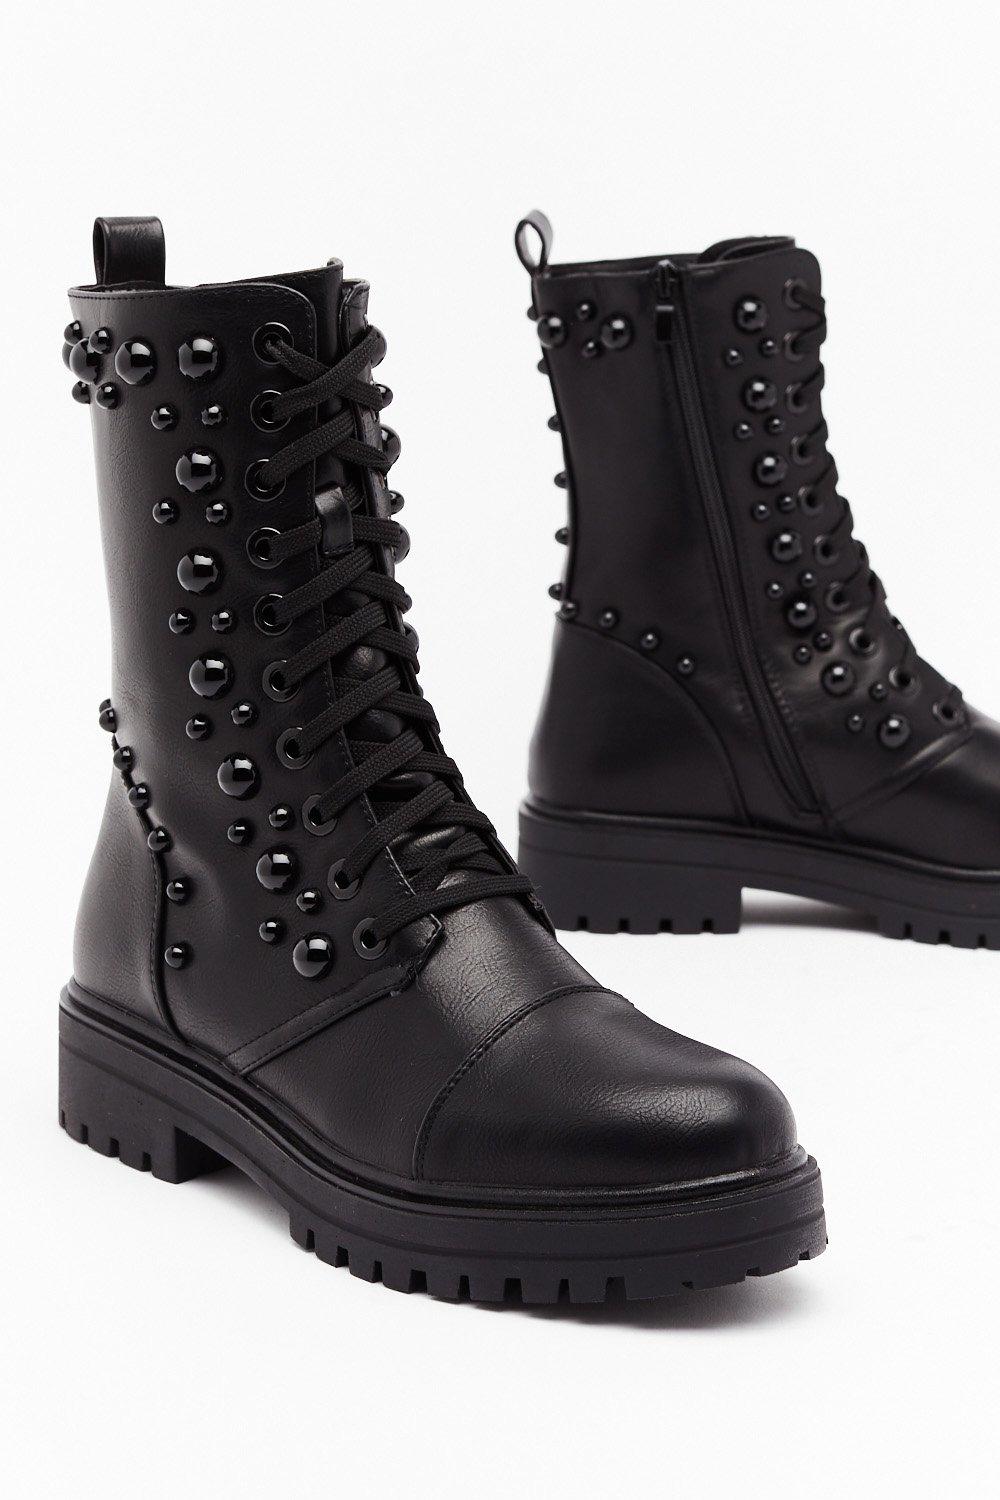 Stud Up Lace-Up Biker Boots | Nasty Gal